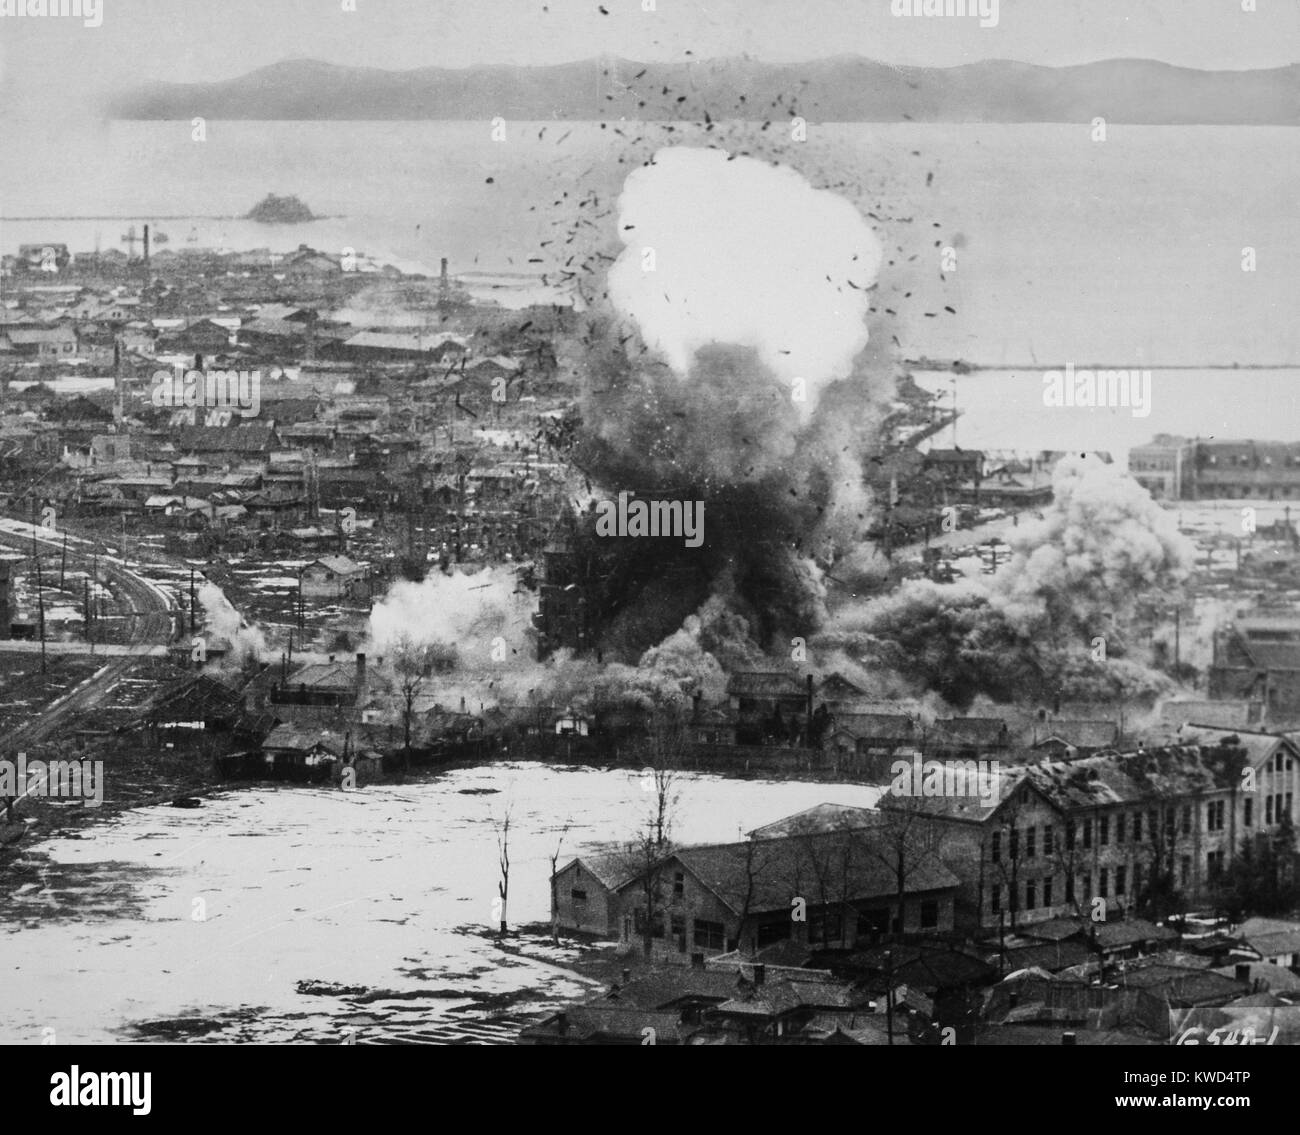 Aerial bombing destroys North Korean supplies during the blockade of Wonsan. Operation Fireball was the code name for a bombardment of the Wonsan area by the 5th Air Force from May through Sept. 1951. UN forces sustained a blockade of the North Korean harbor from Feb. 16, 1951 until the armistice signing on July 1953. Korean War, 1950-53. (BSLOC 2014 11 109) Stock Photo